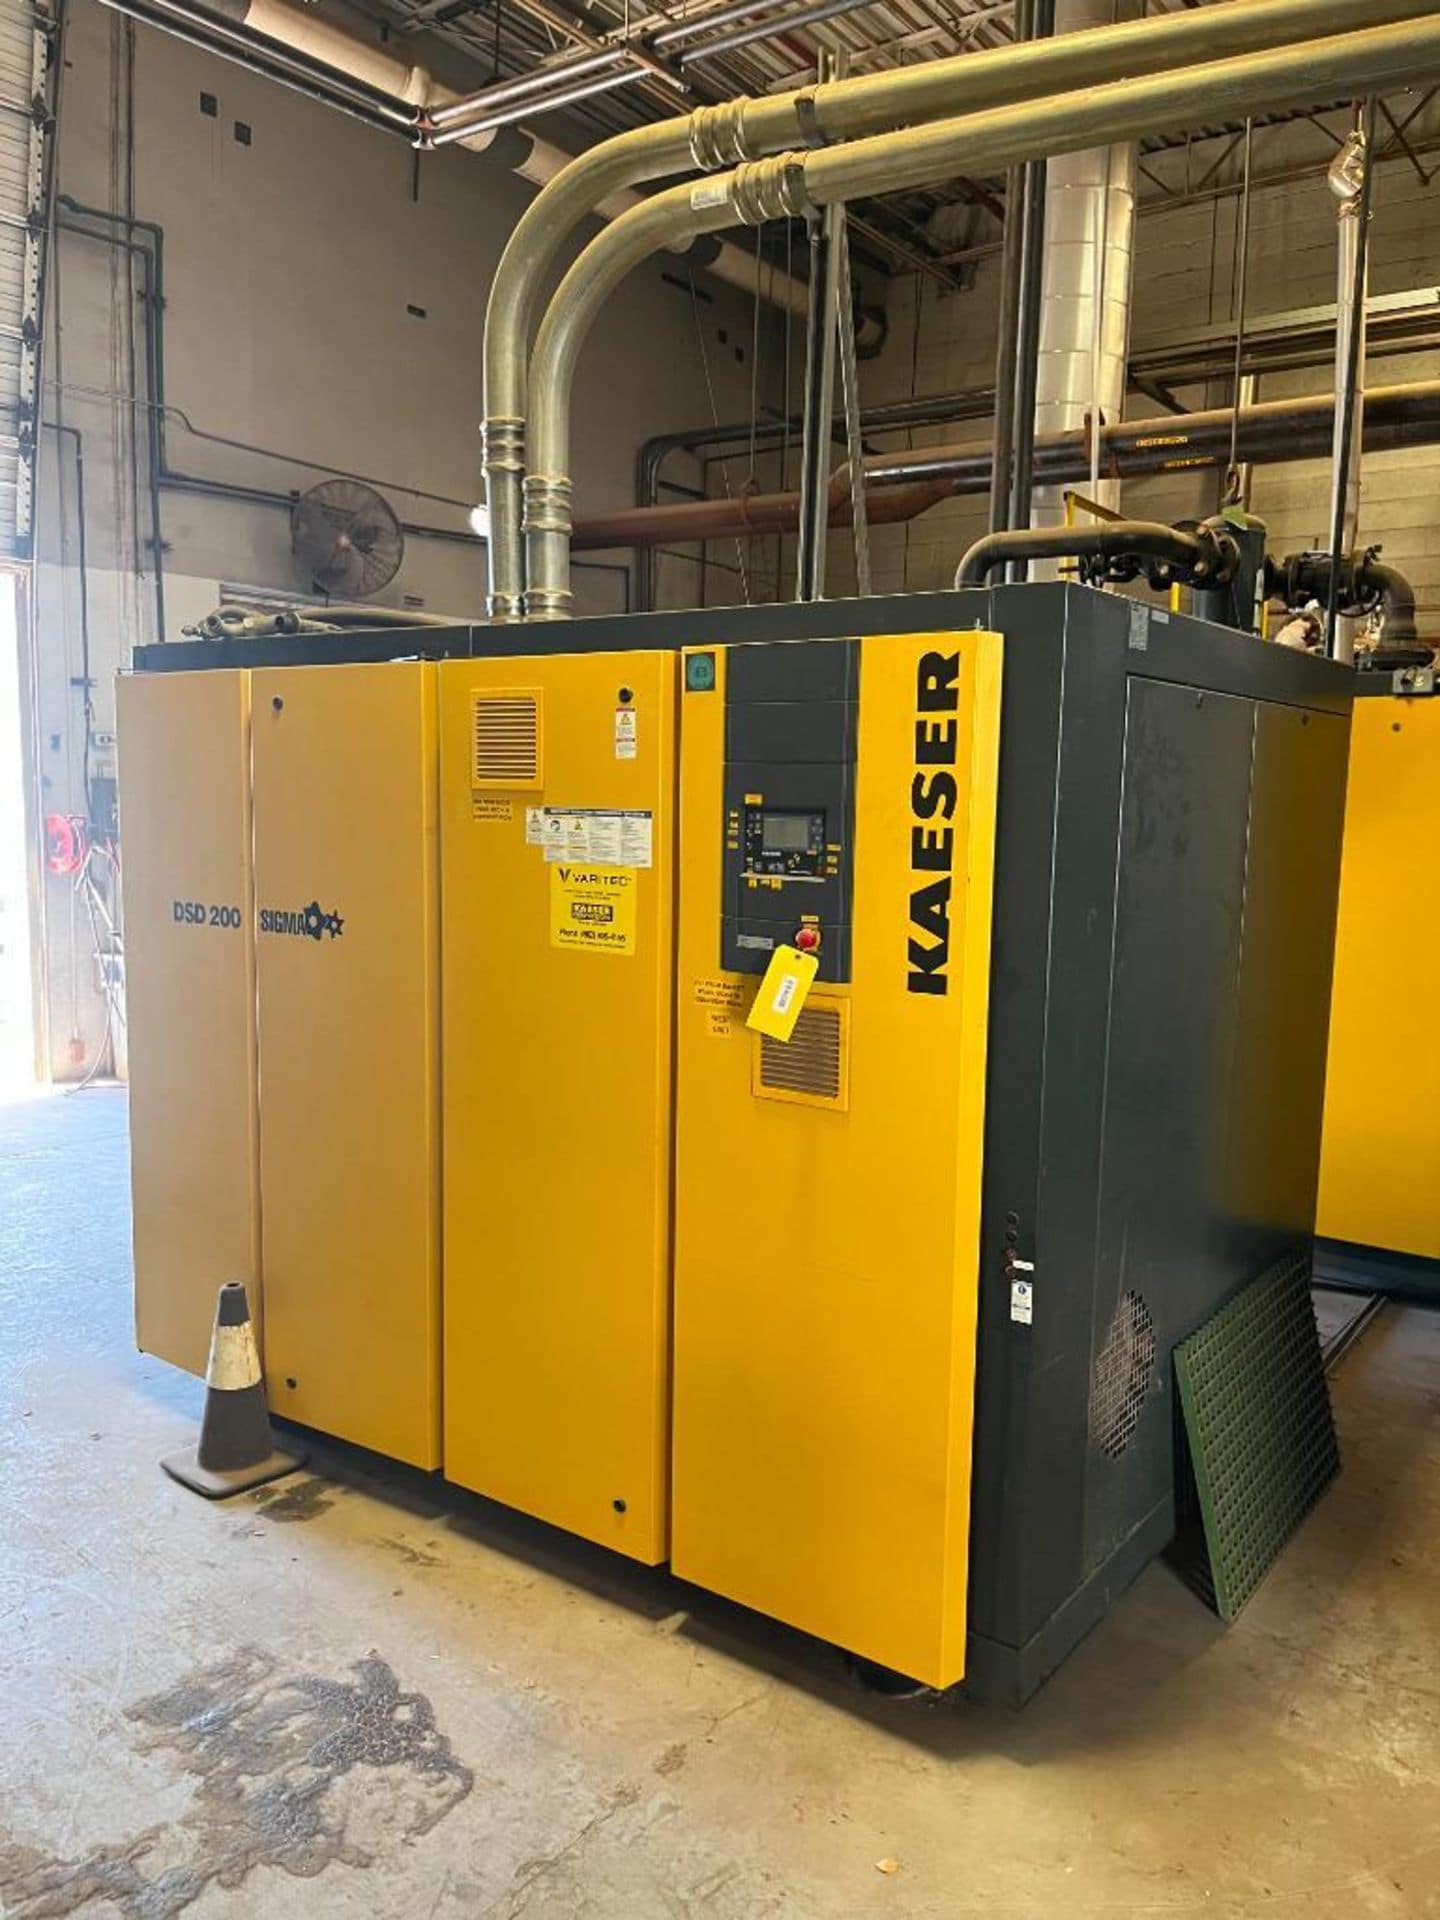 2014 kaeser dsd 200 air compressor 250hp with 28442 running hours and 7775 load hours